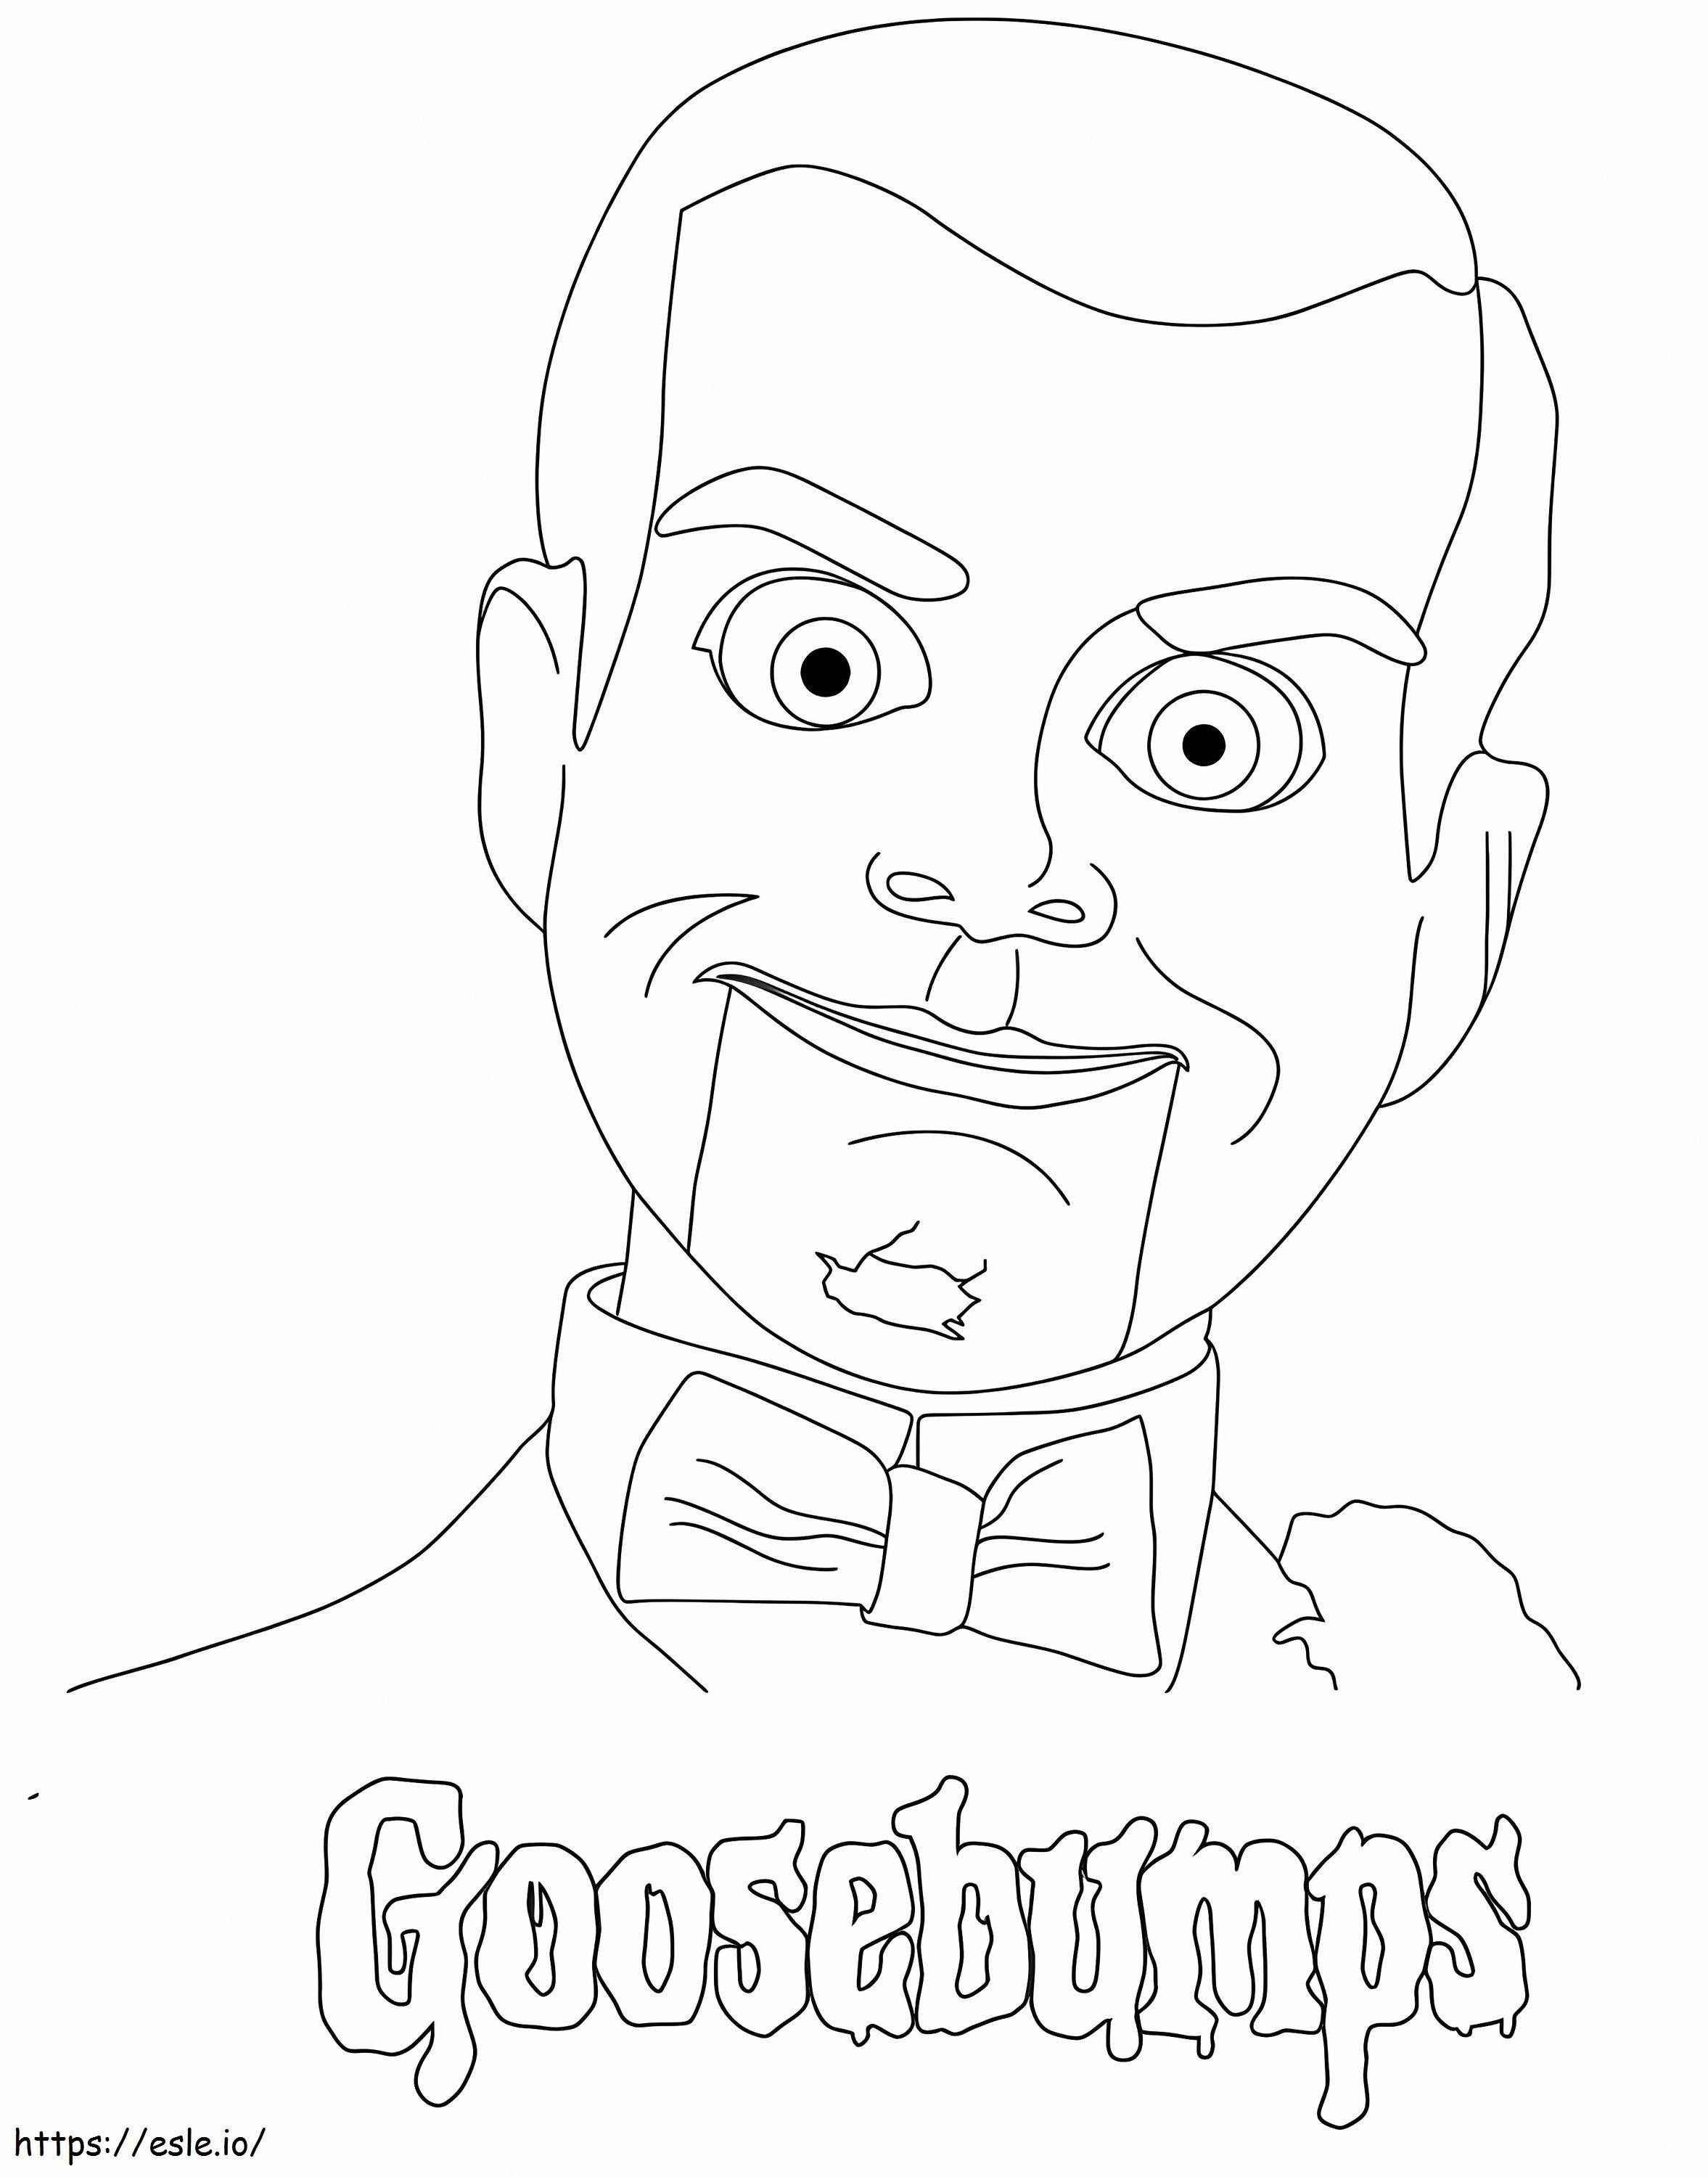 Slappy 1 coloring page